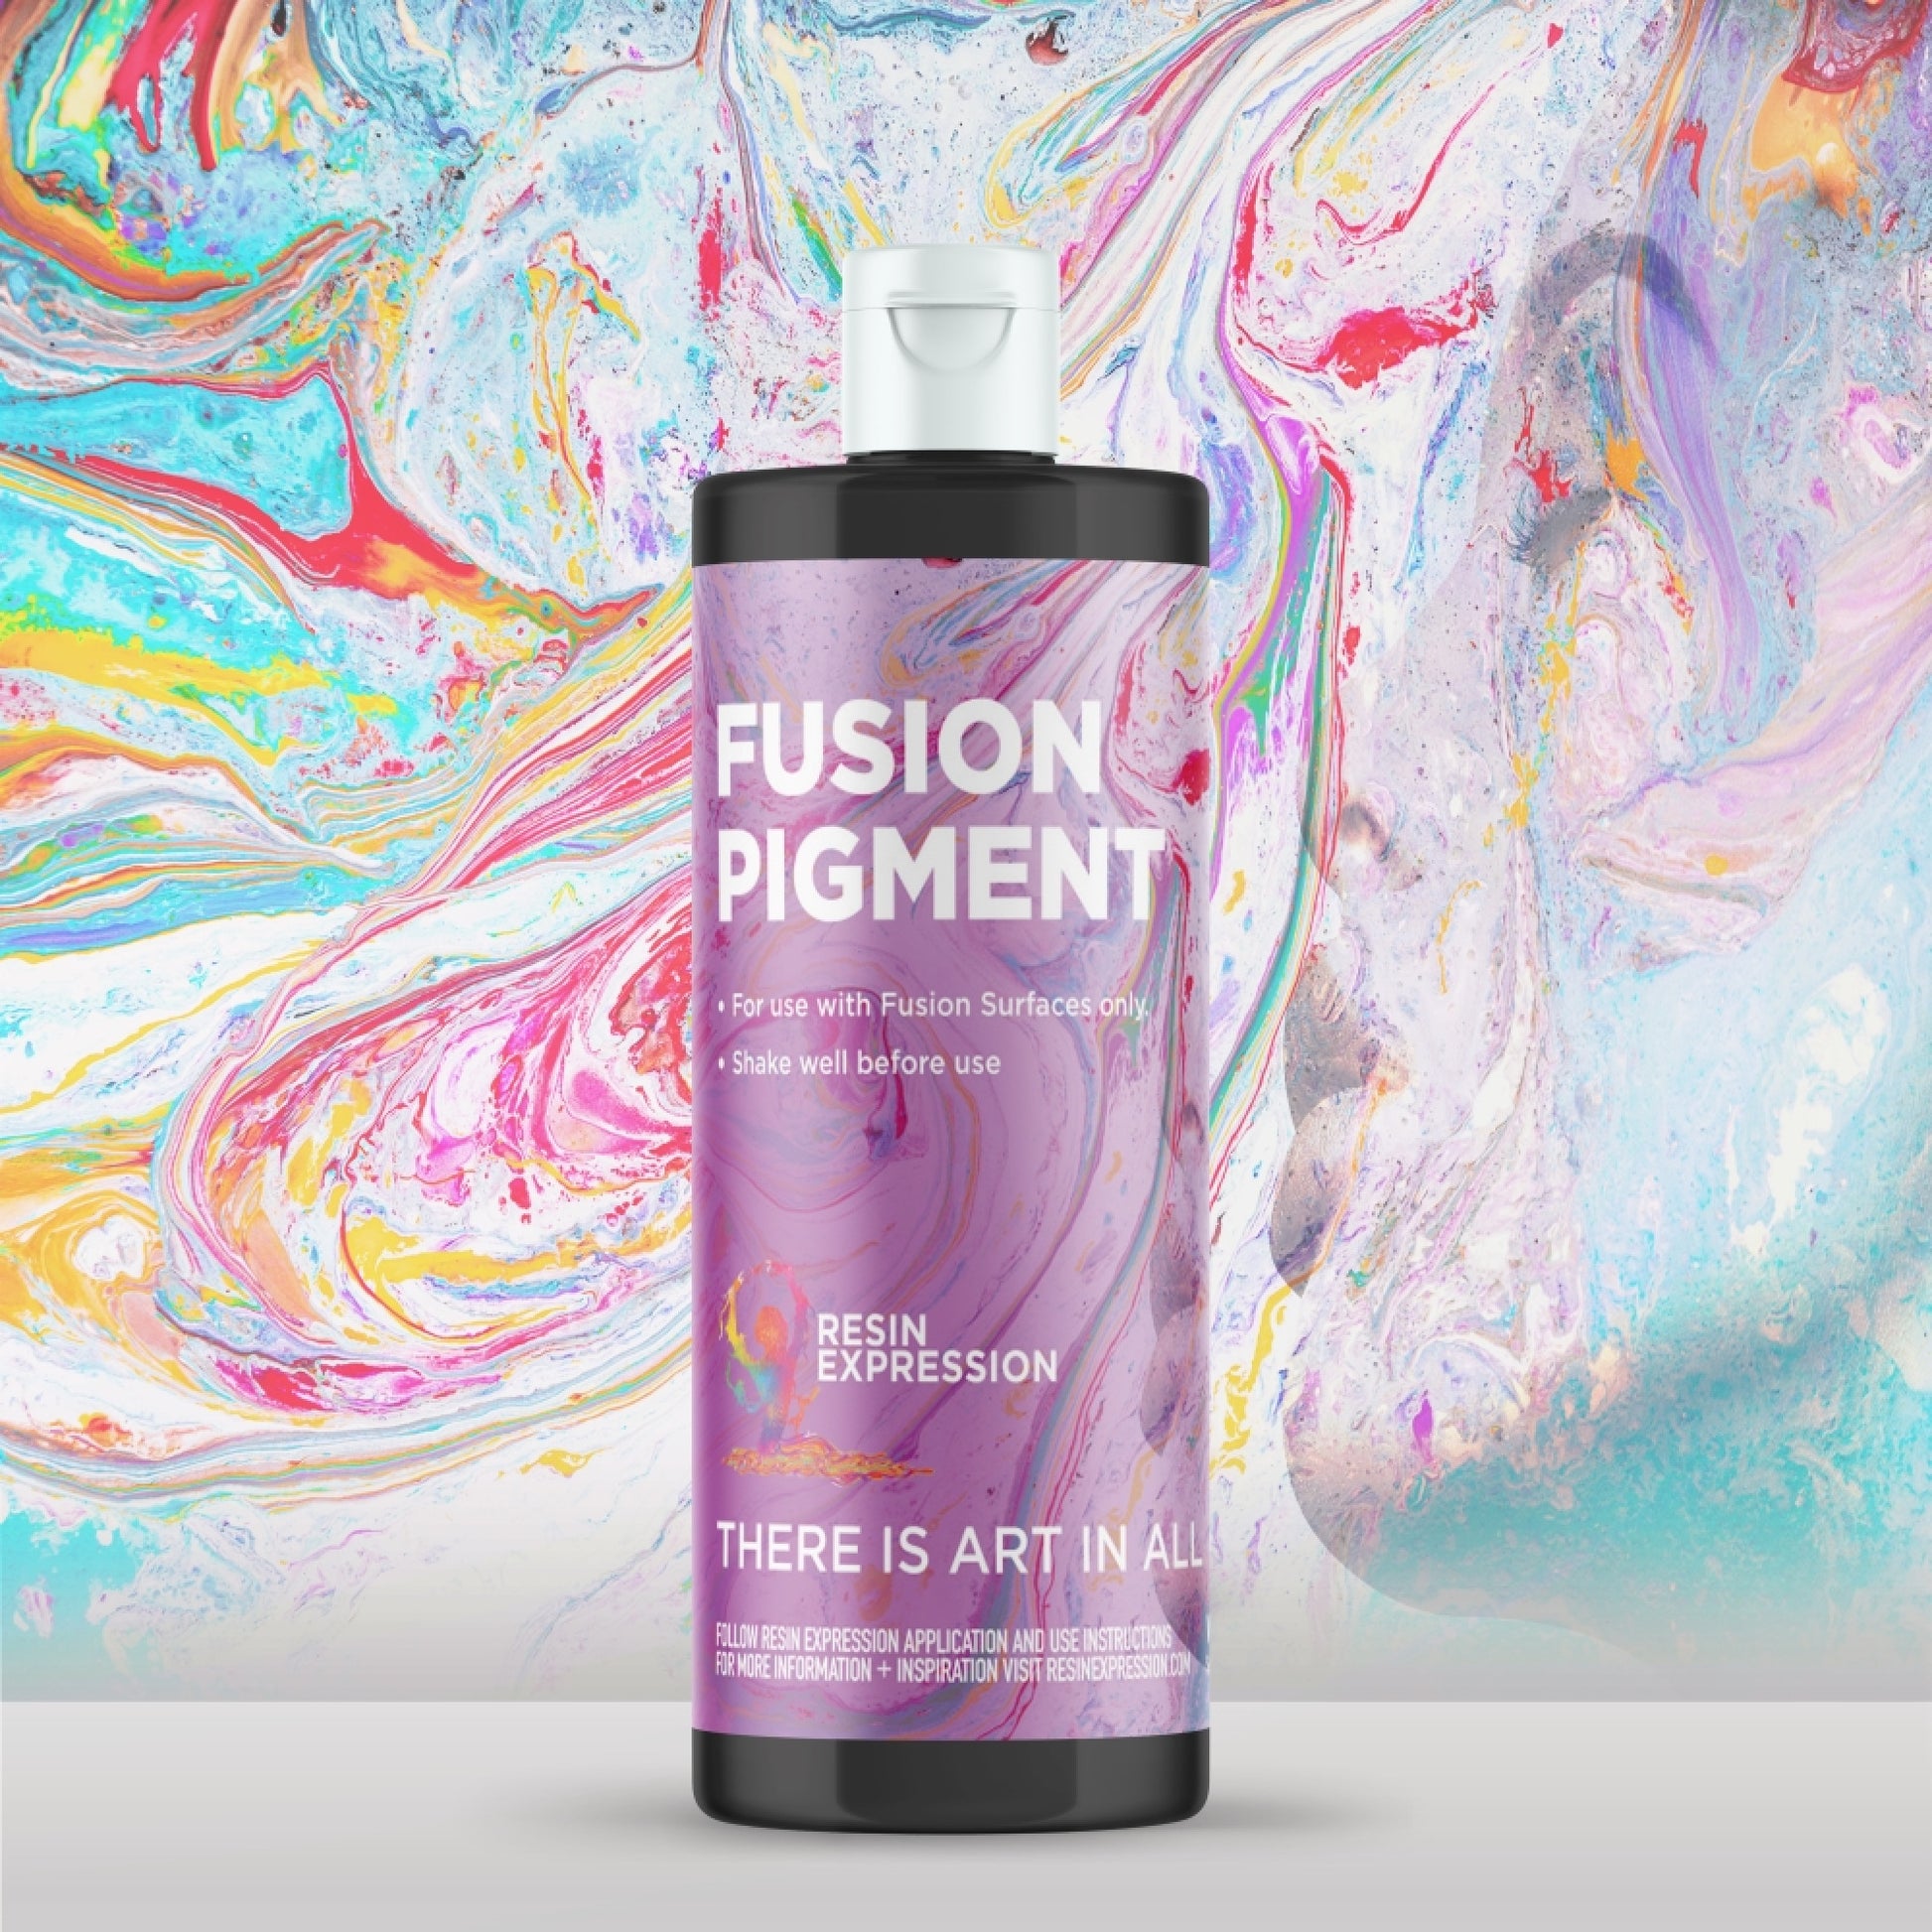 Transform Your Space - Resin Expression's Fusion Surface System for a Fresh Look